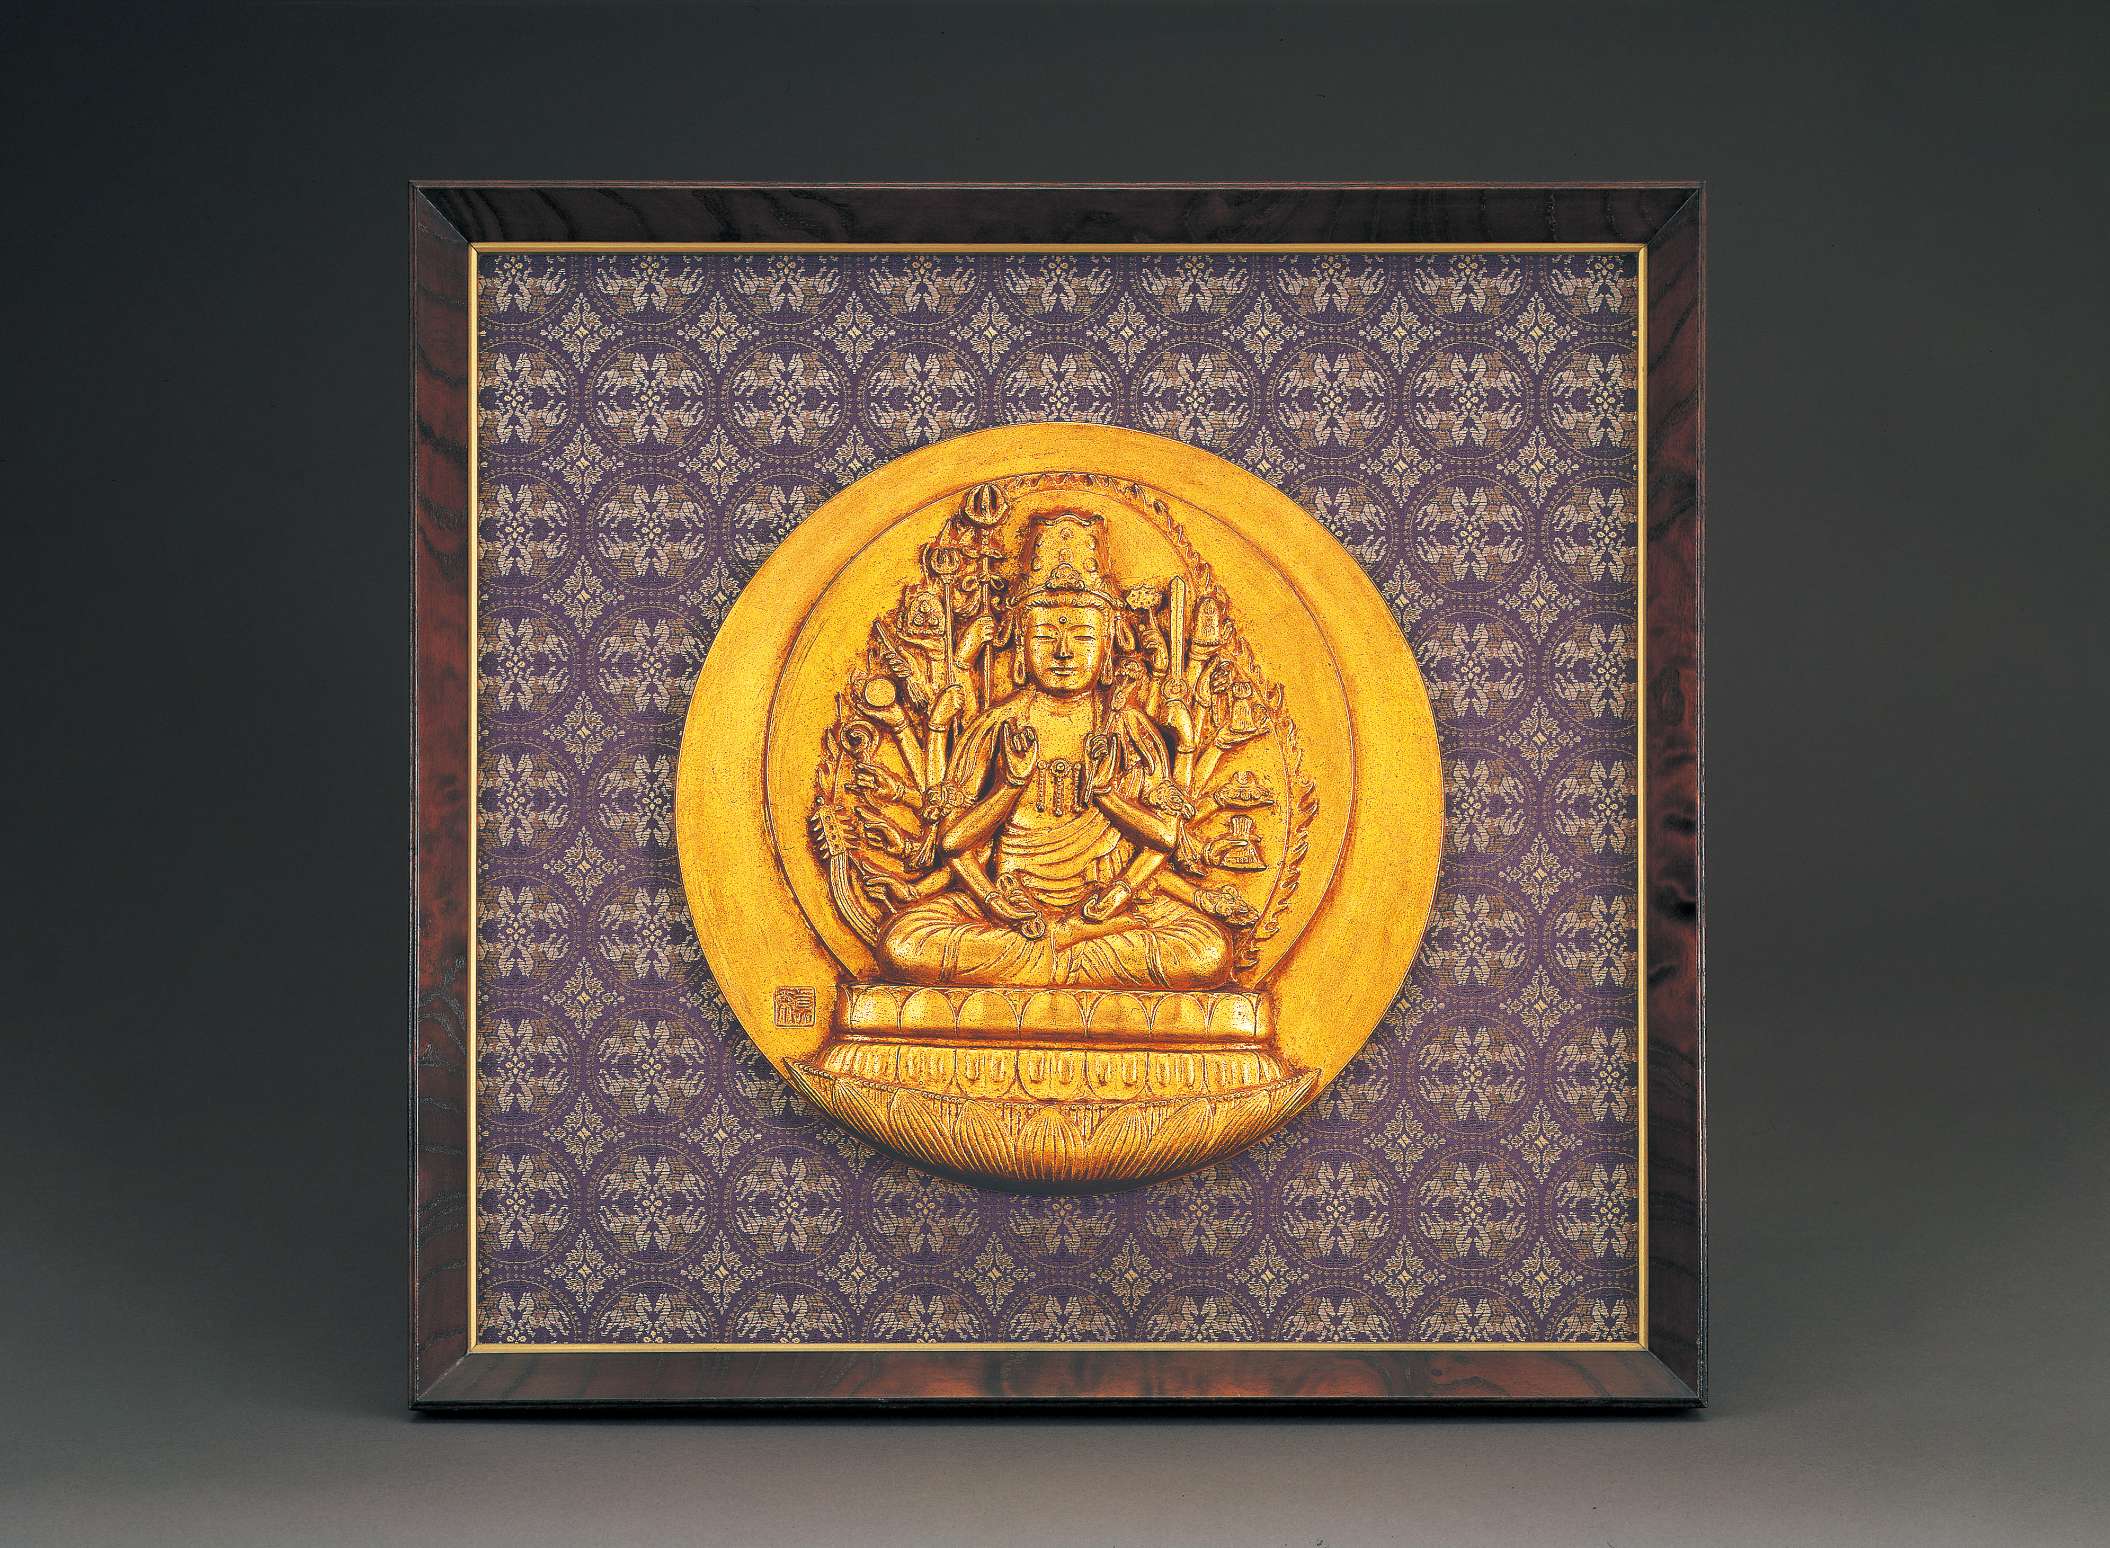 A circular golden relief of a bodhisattva in royal garb and jewelry, wearing a high crown, with an array of twenty arms bearing symbolic implements, sitting cross-legged atop a stylized lotus seat.